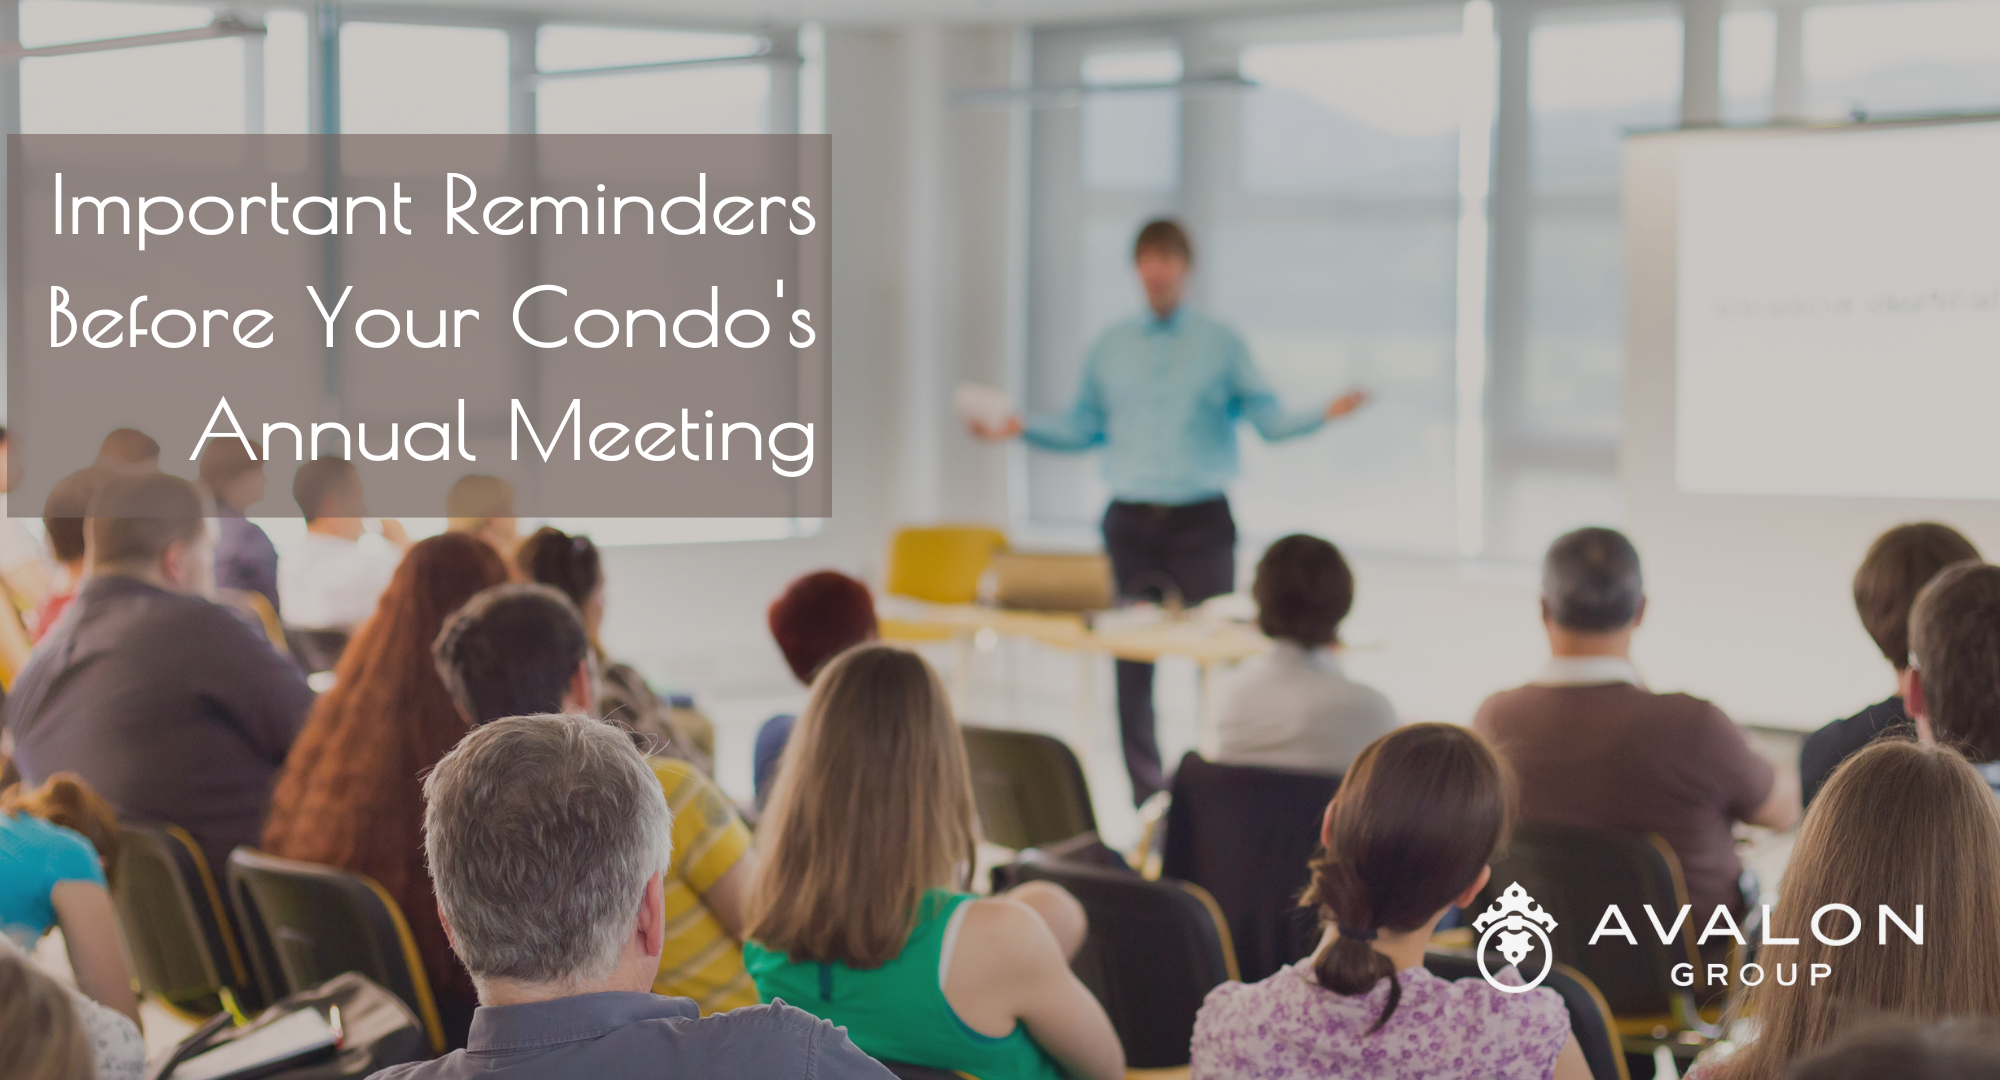 Important Reminders Before Your Condo's Annual Meeting. The picture shows a condo meeting with a speaker in the front of the room wearing a teal shirt.